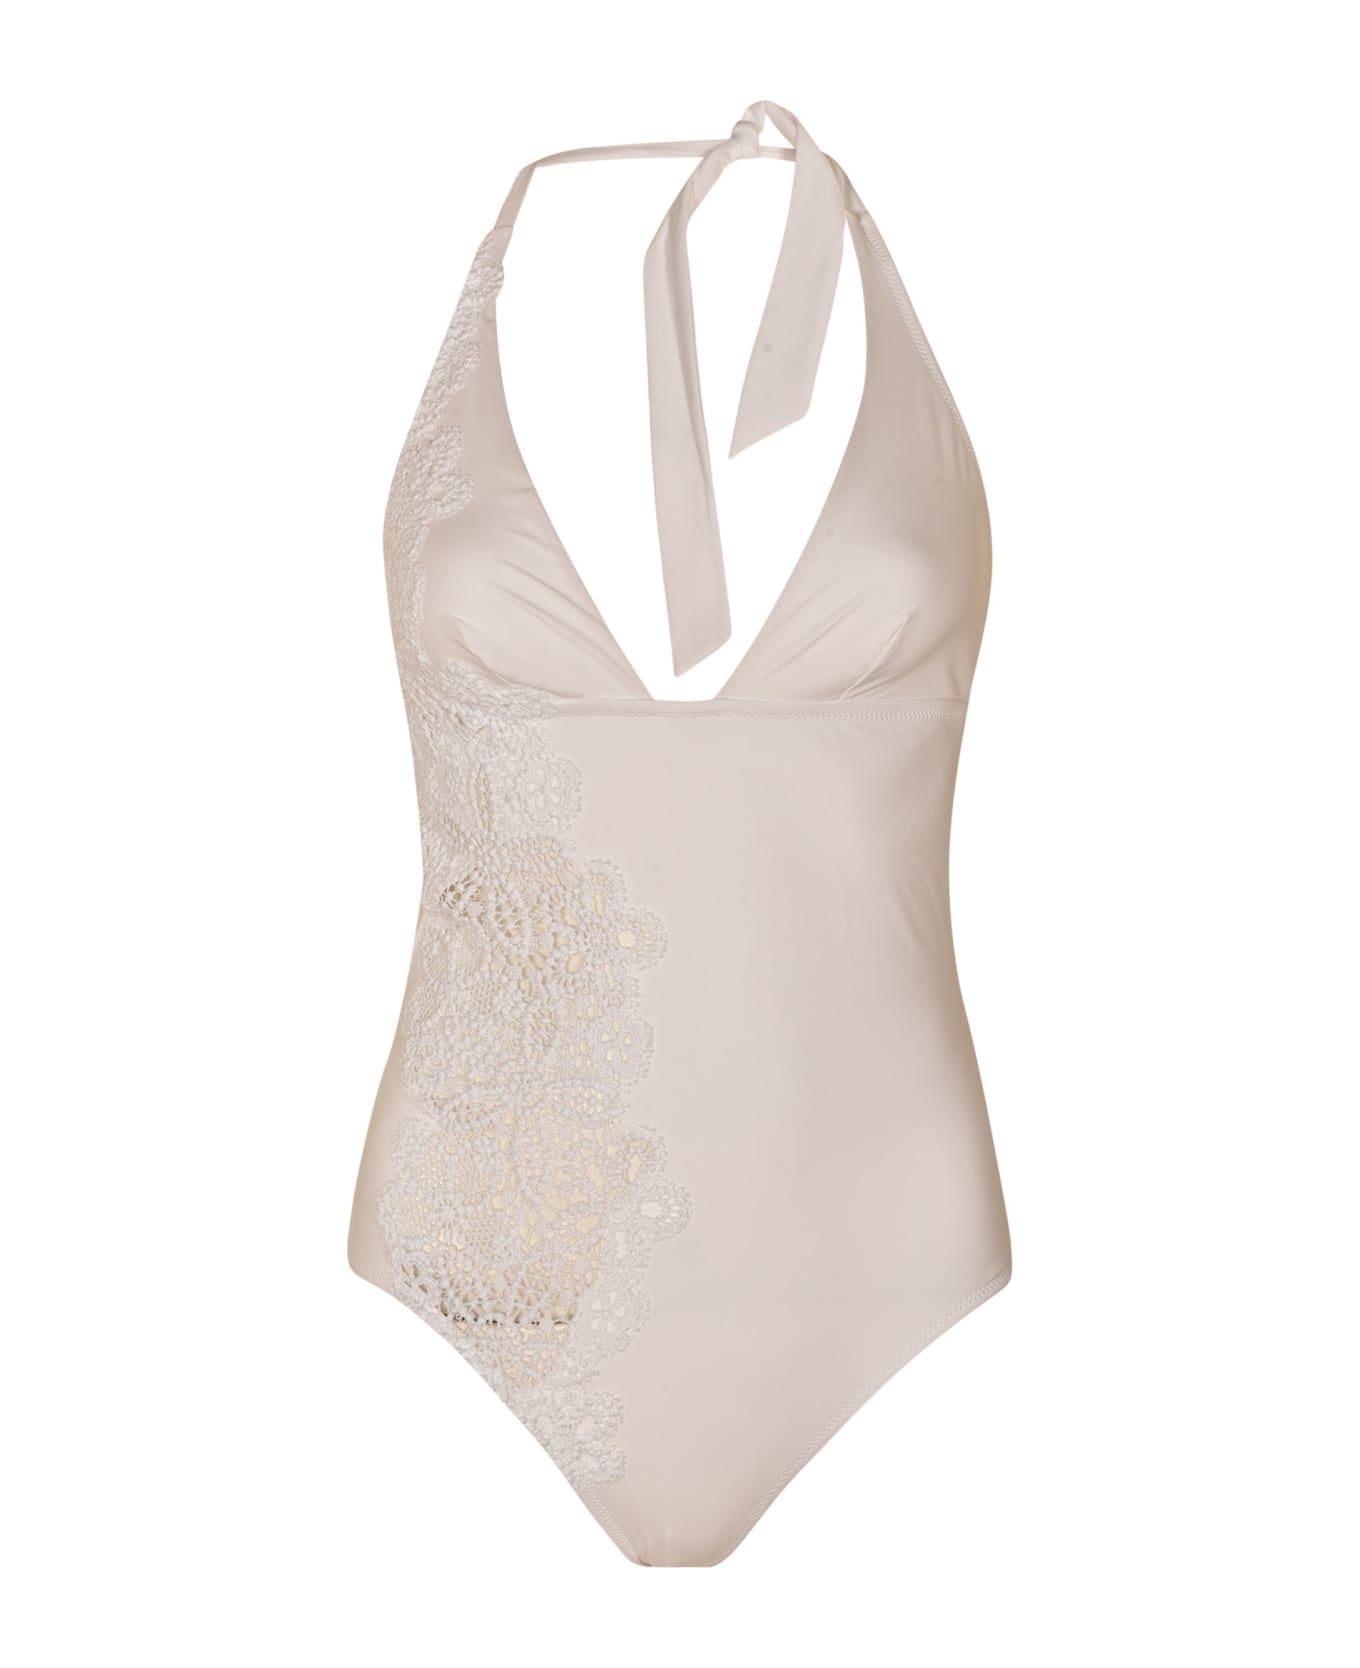 Ermanno Scervino Floral Perforated Swimsuit - White 水着